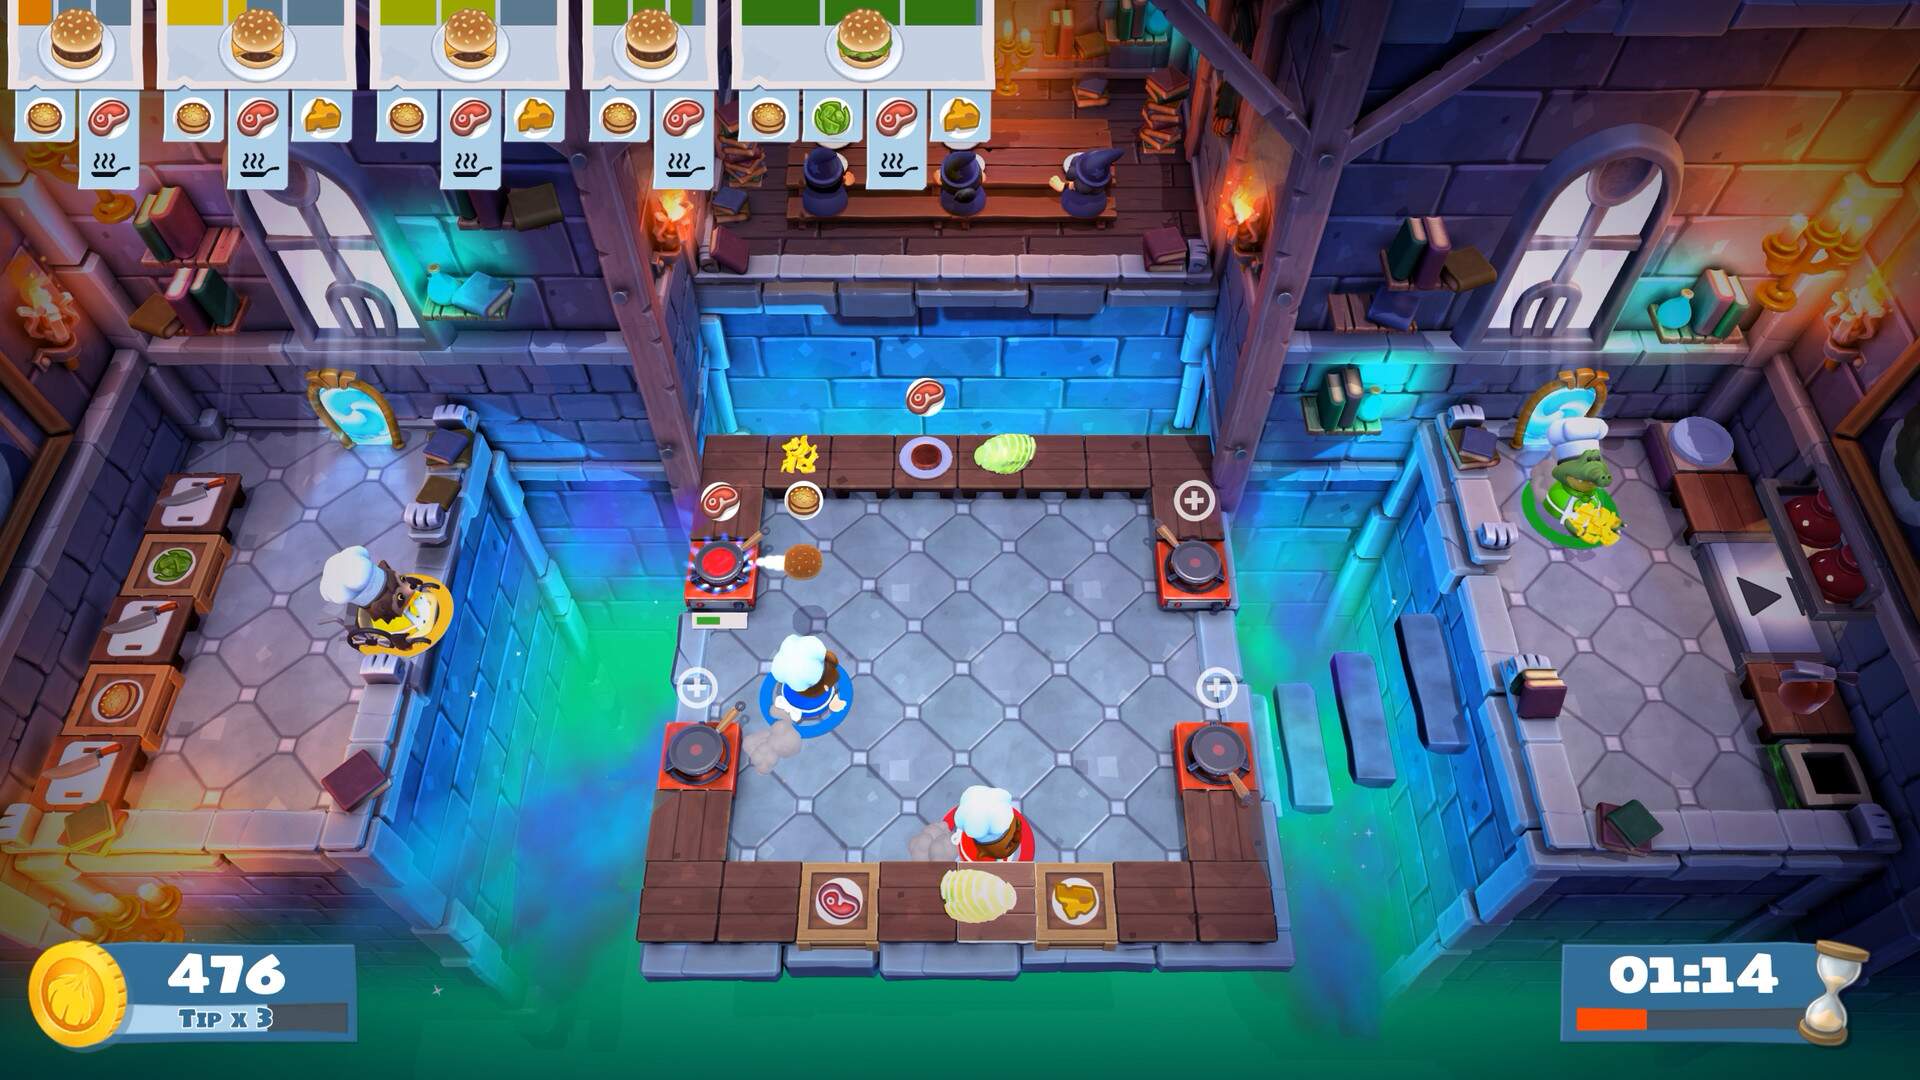 Overcooked 2 Review